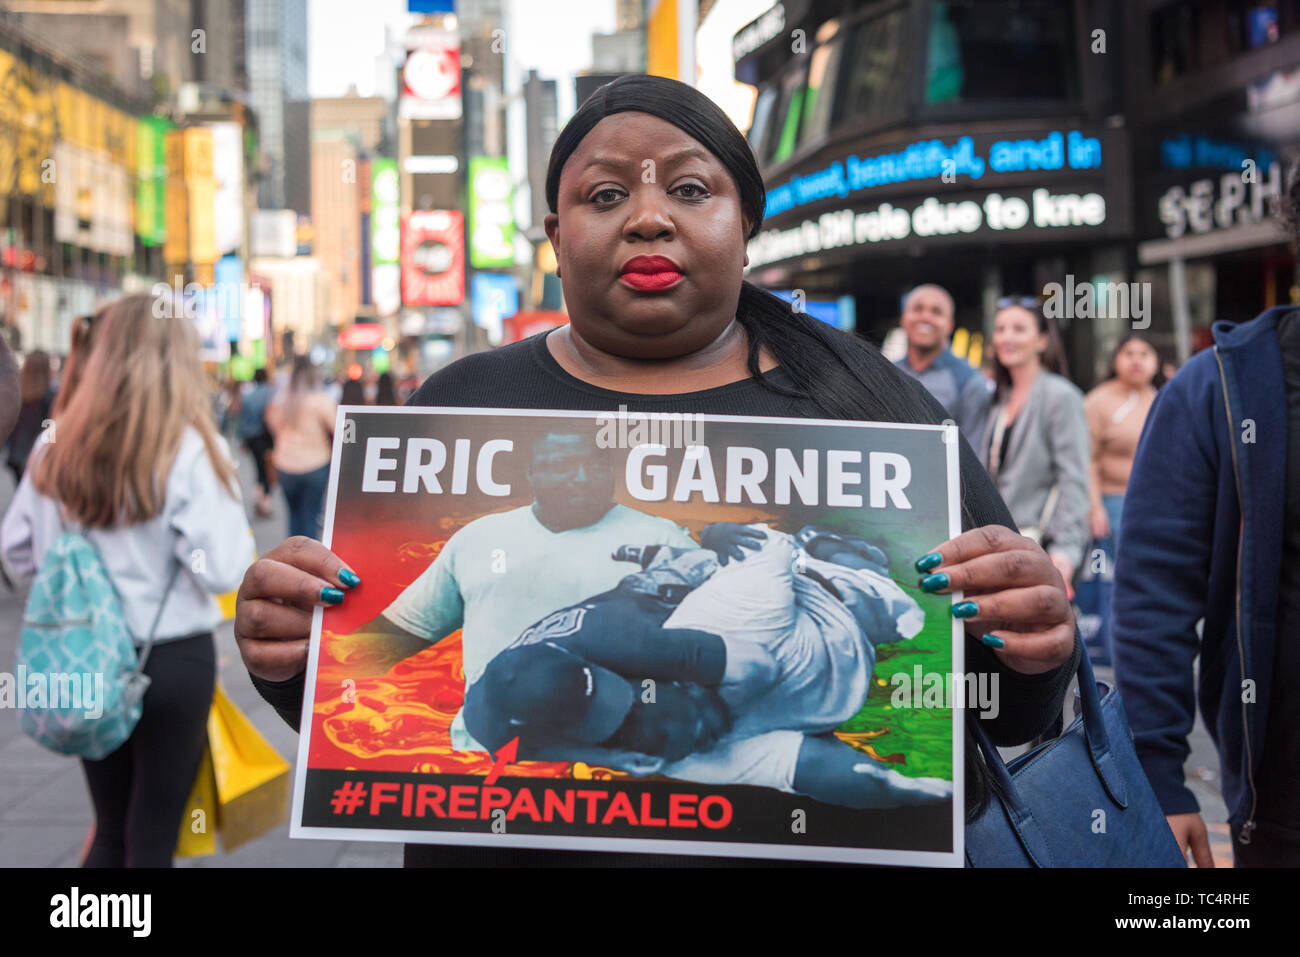 Jasmine Robinson, former candidate for the NY State Senate. - On June 4, 2019, protesters rallied in Times Square in New York City demanding the firing of Officer Pantaleo for the choking death of Eric Garner in 2014. Daniel Pantaleo is currently standing administrative trial which began on May 13. On May 21, the judge overseeing his case delayed the remainder of the hearing until June 5, 2019. Pantaleo has been on desk duty since Eric Garner's death and could face penalties ranging from loss of vacation days to firing from the NYPD. (Photo by Gabriele Holtermann-Gorden/Pacific Press) Stock Photo